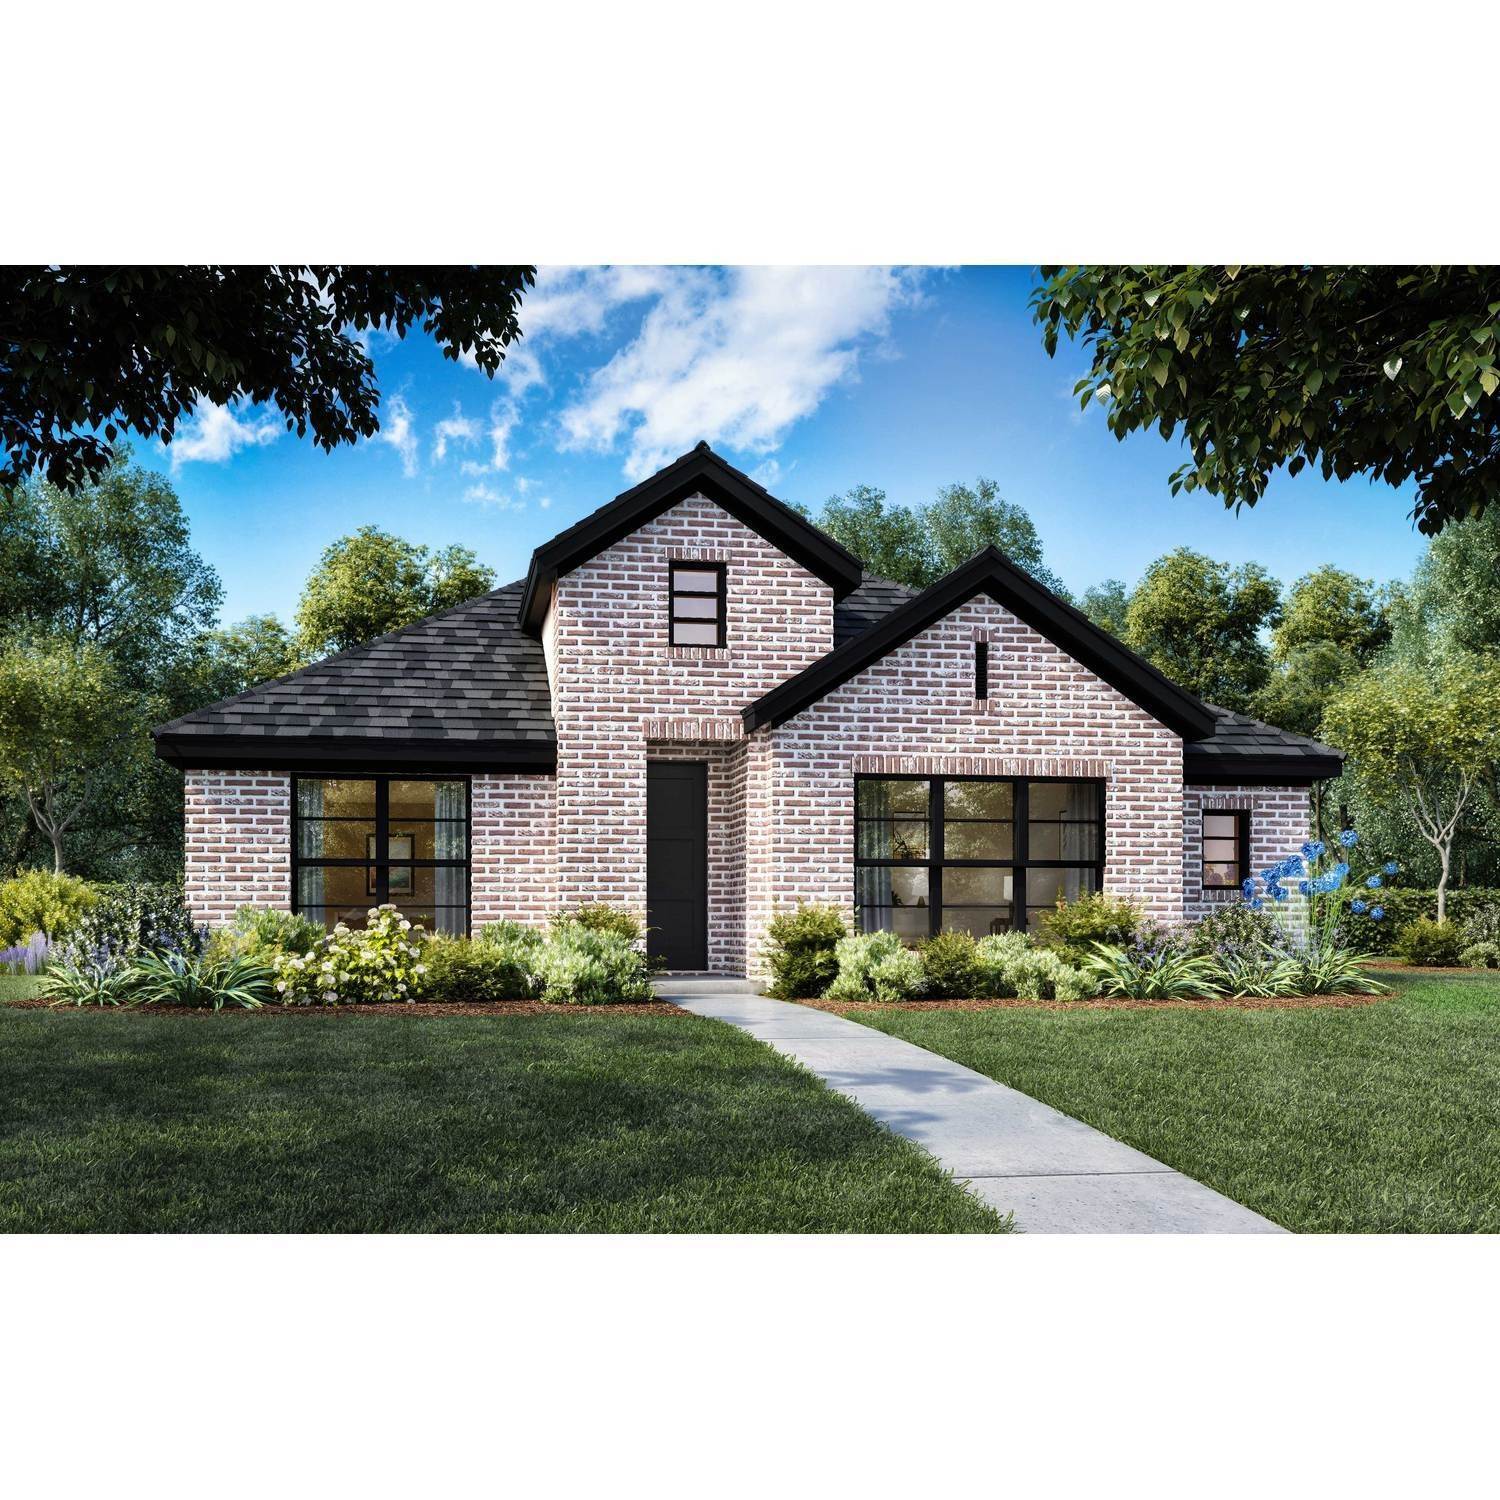 Single Family for Sale at Edgewater 1835 Gettysburg Blvd, Fate, TX 75189